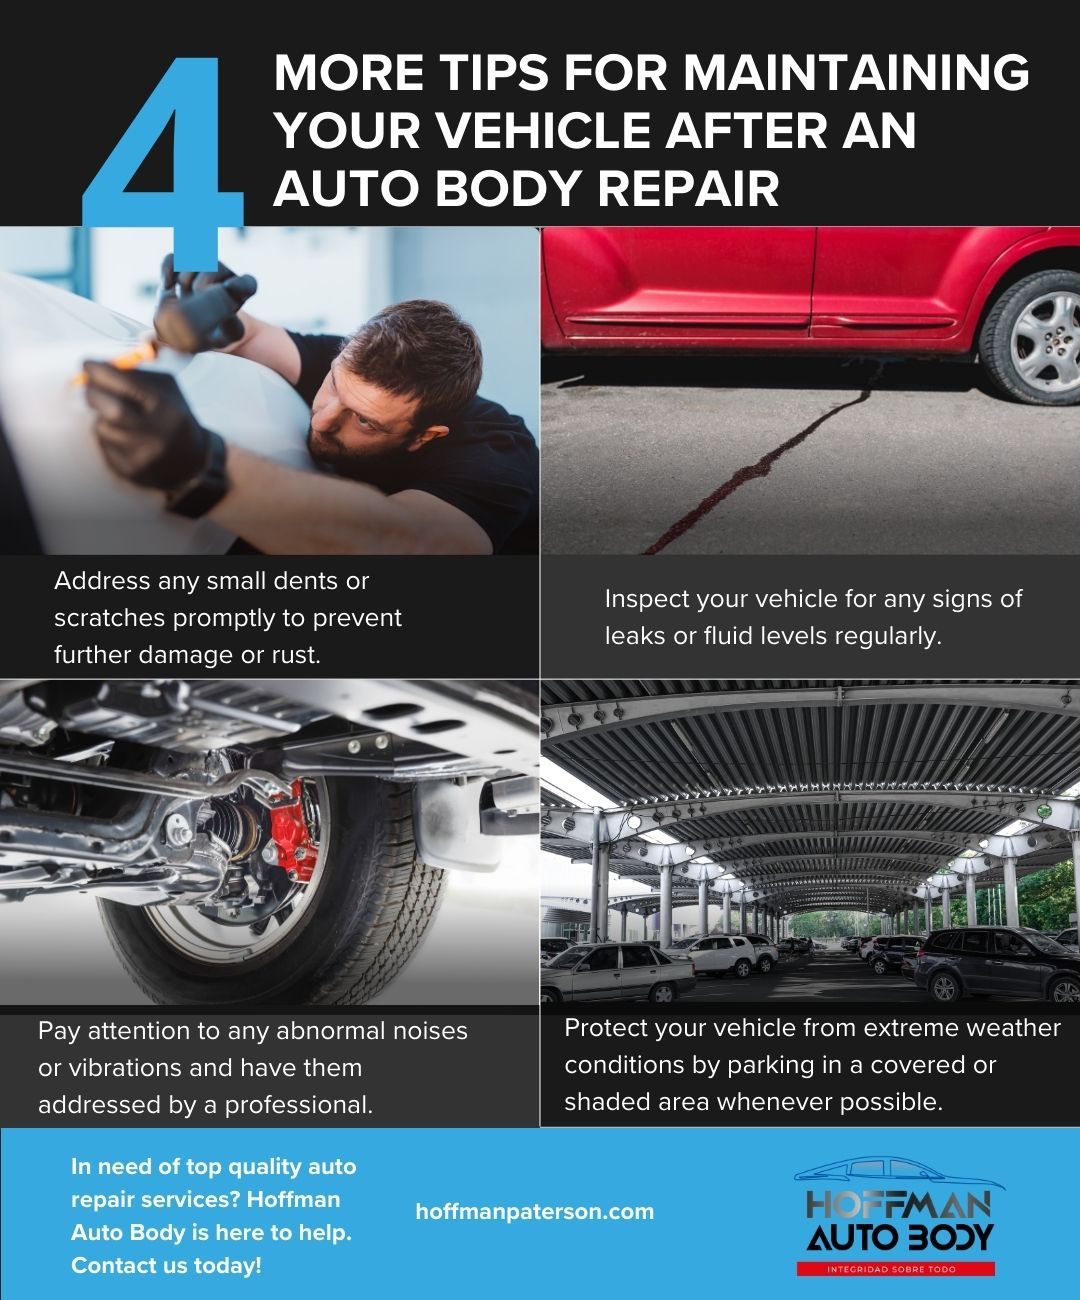 M38915 - IG - Tips for Maintaining Your Vehicle After an Auto Body Repair.jpg